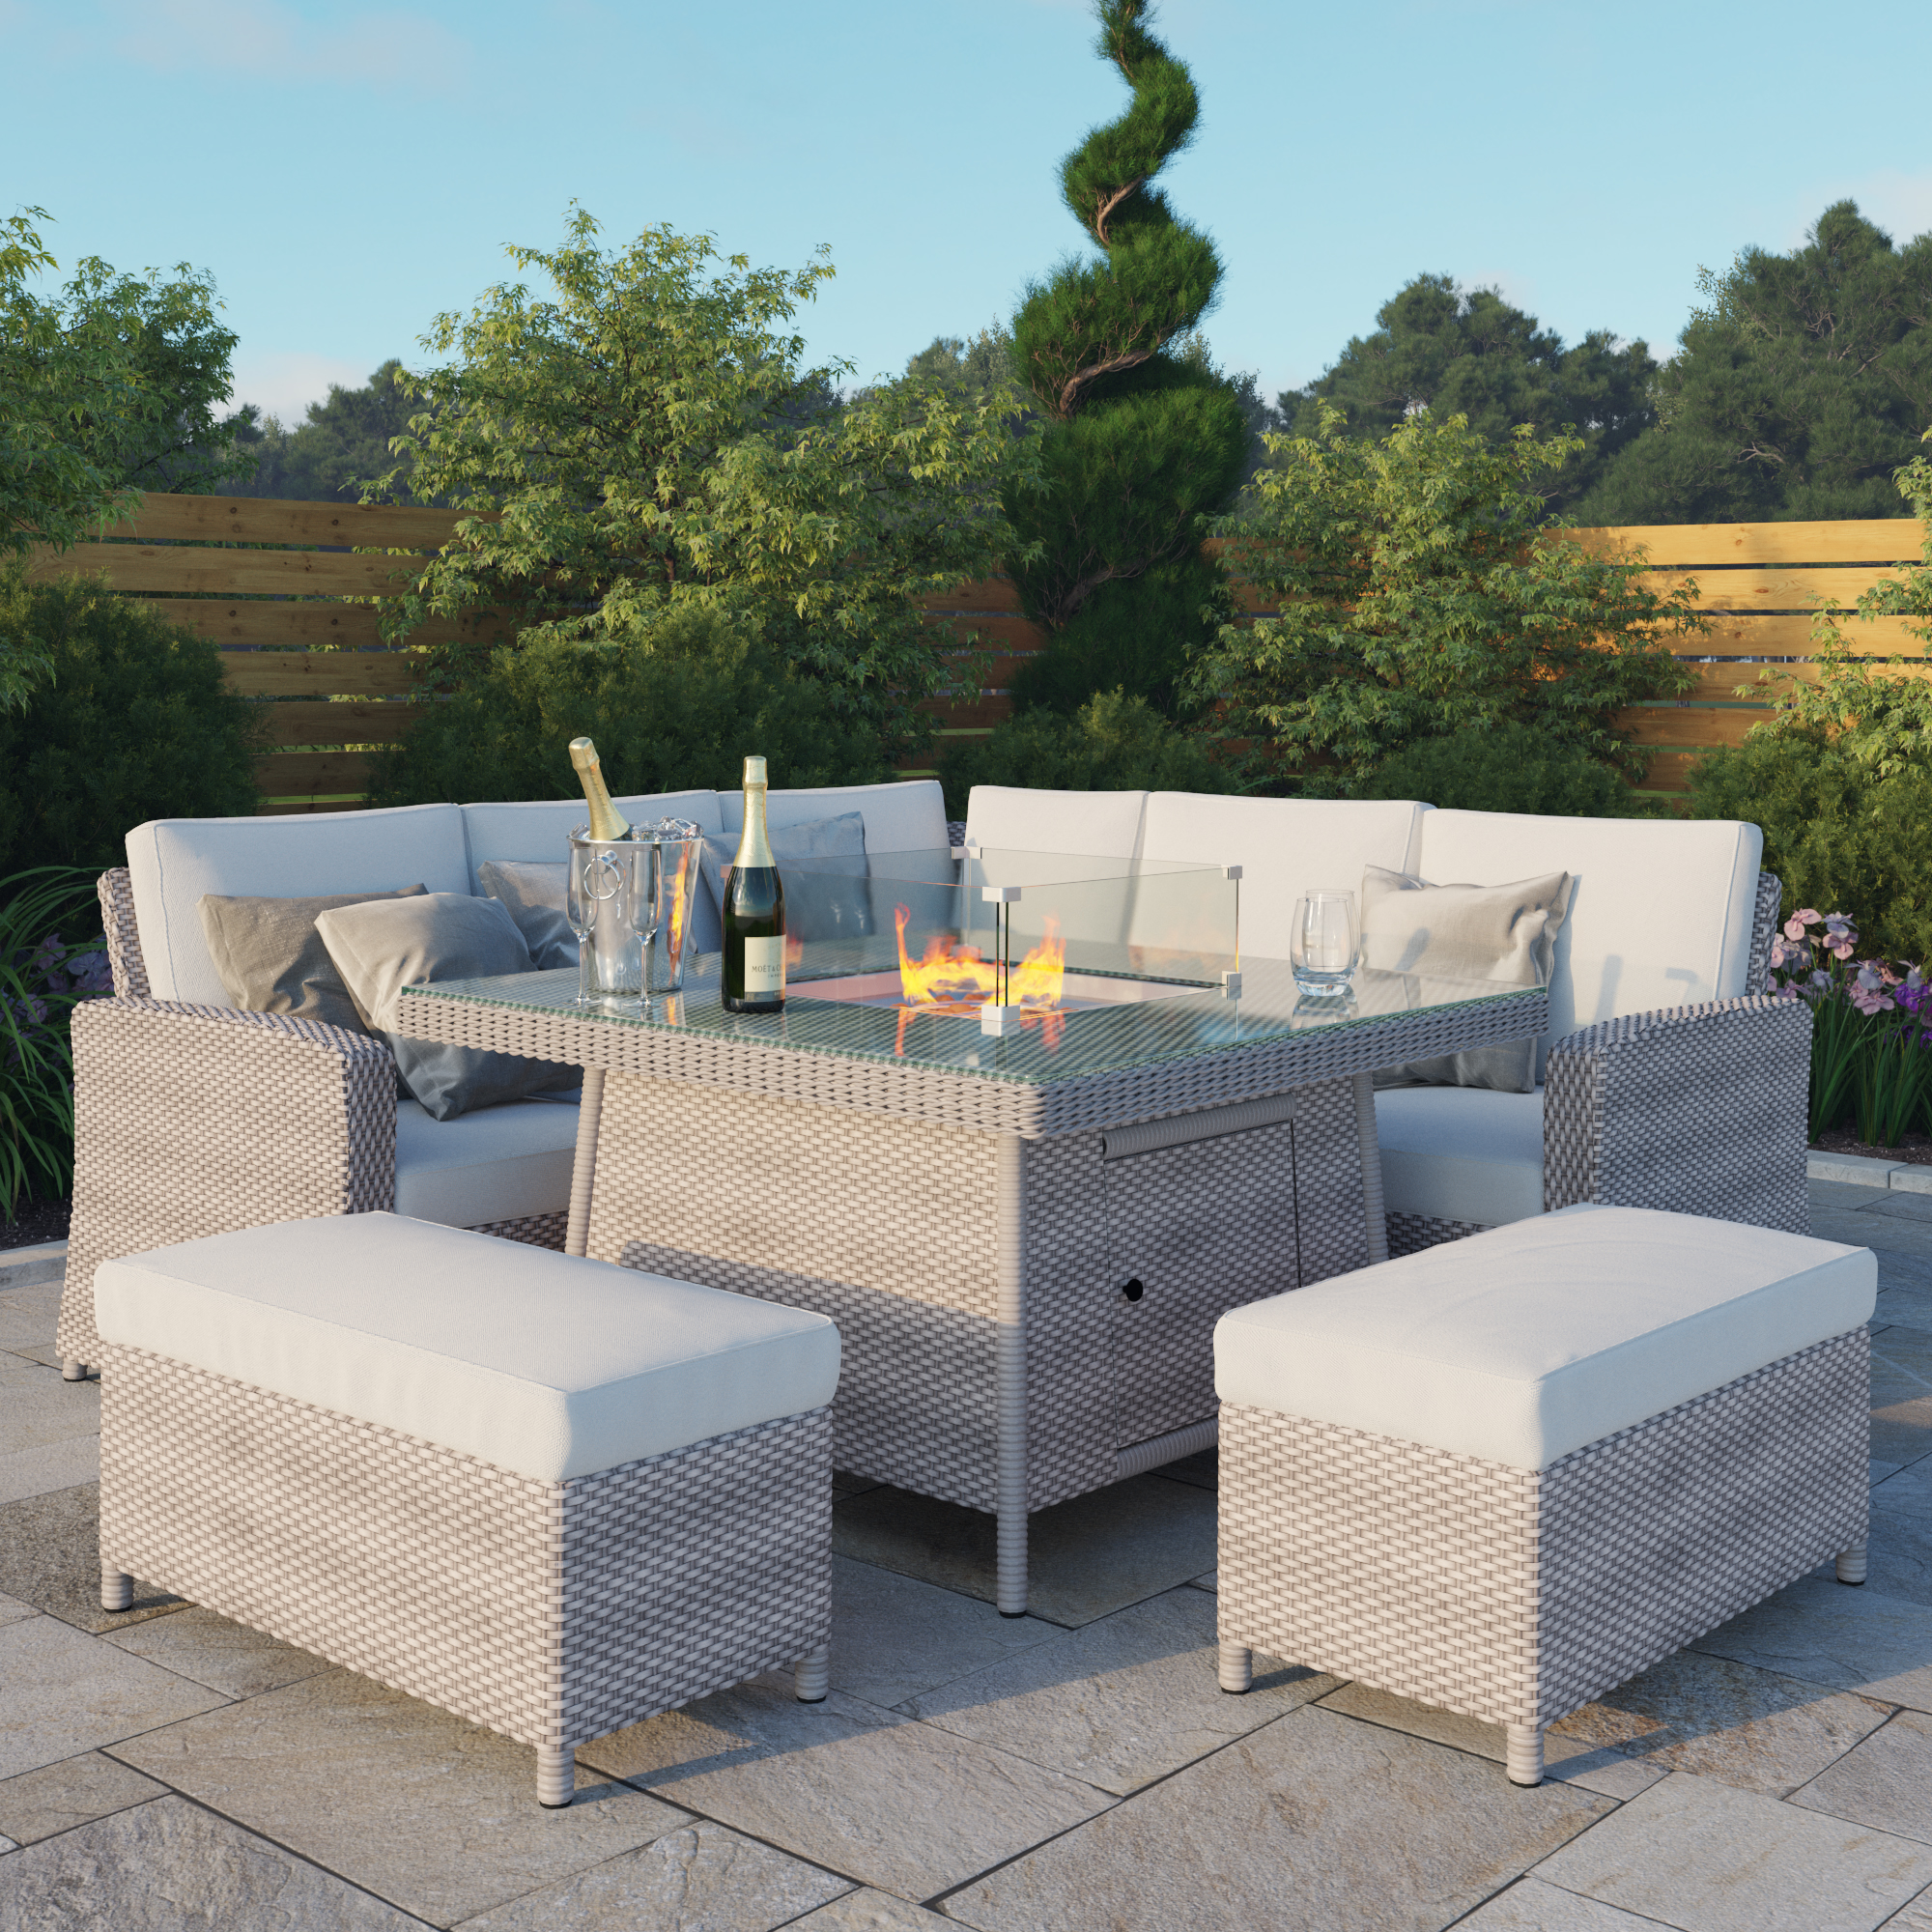 Billyoh Capri Rattan Garden Corner Sofa Set With Firepit Table L Shaped Rattan With 2 Benches And Firepit